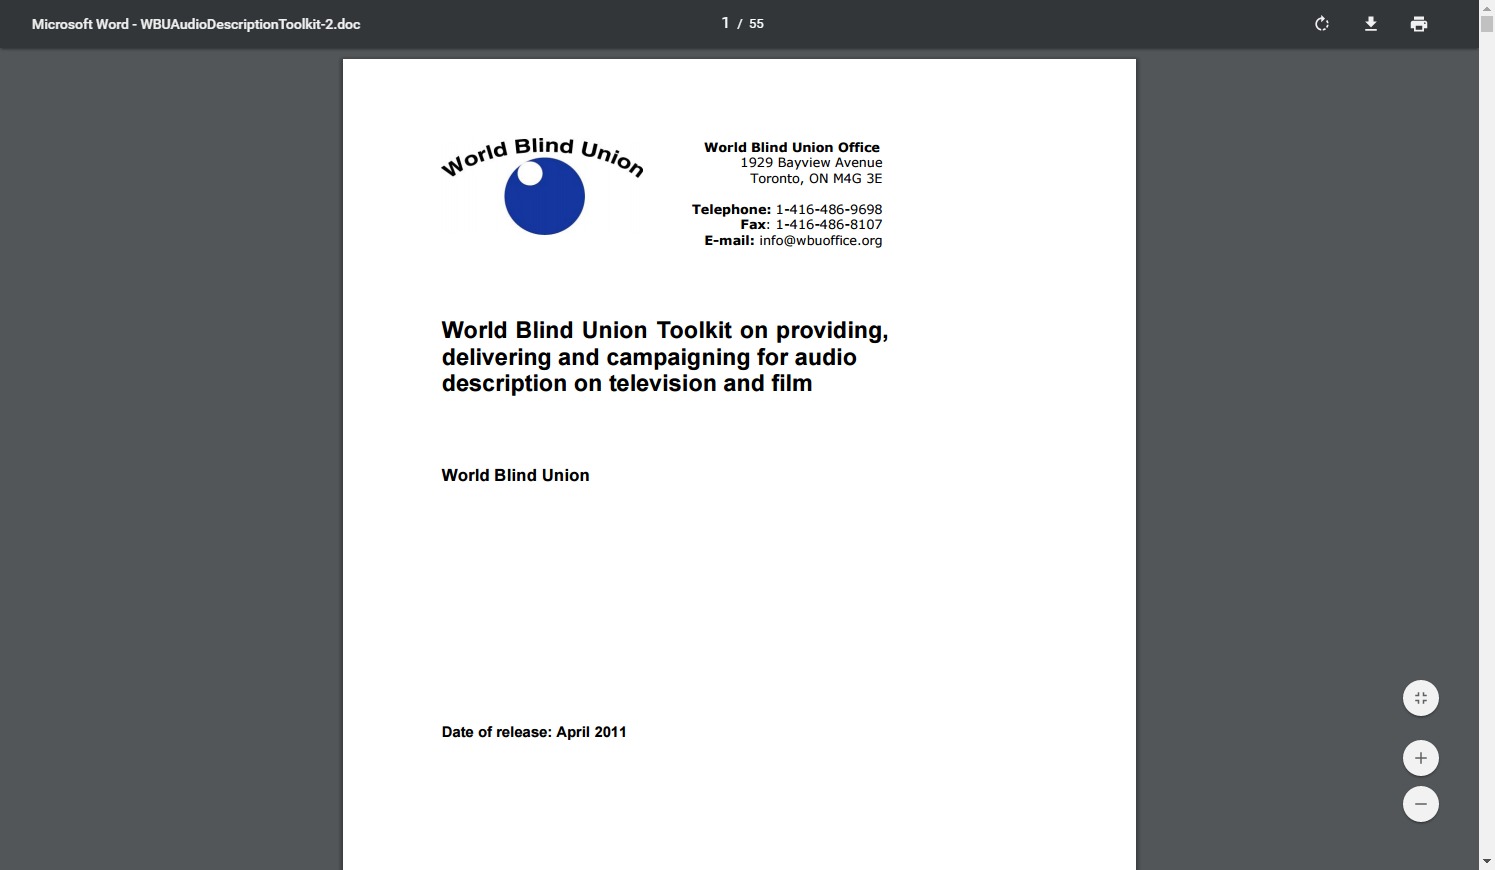 World Blind Union Toolkit On Providing, Delivering and Campaigning for Audio Description on Television and Film